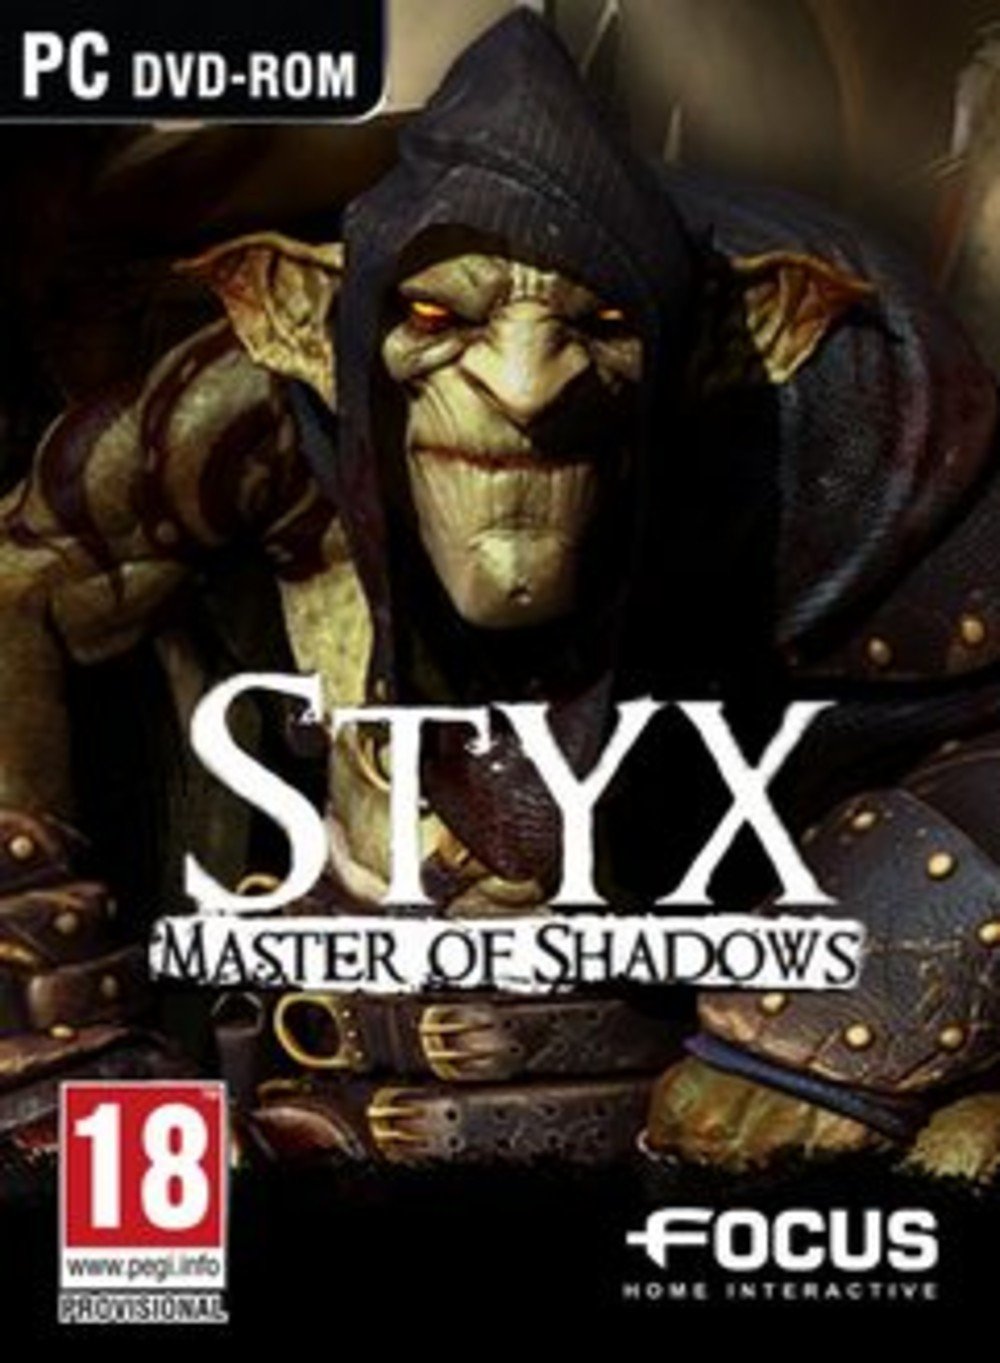 ps4 styx download free